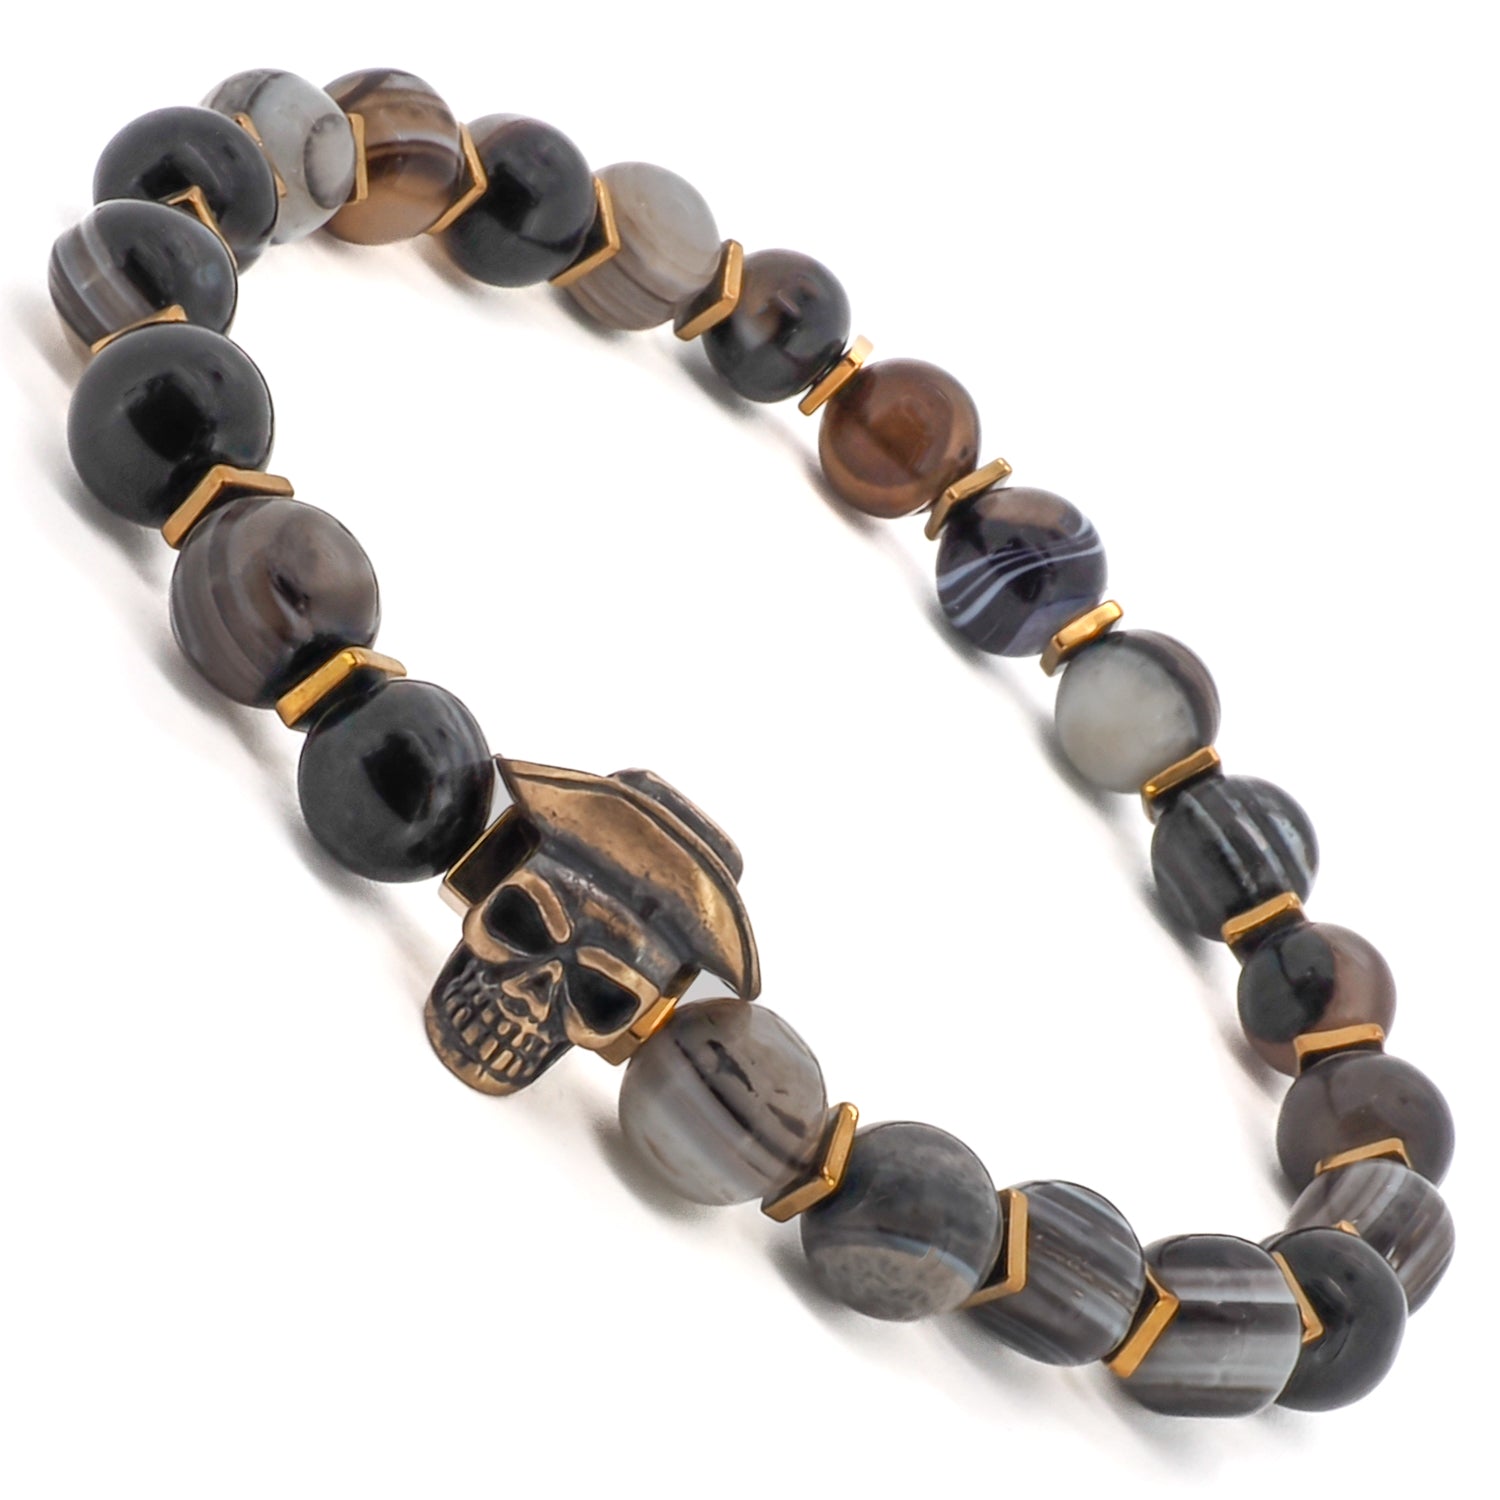 The Cowboy Hat Skull Agate Bracelet is a perfect choice for men who want to add an edgy touch to their style. Featuring Agate stone beads, gold hematite spacers, and a bronze cowboy hat skull charm, this handmade bracelet is a unique and eye-catching accessory.